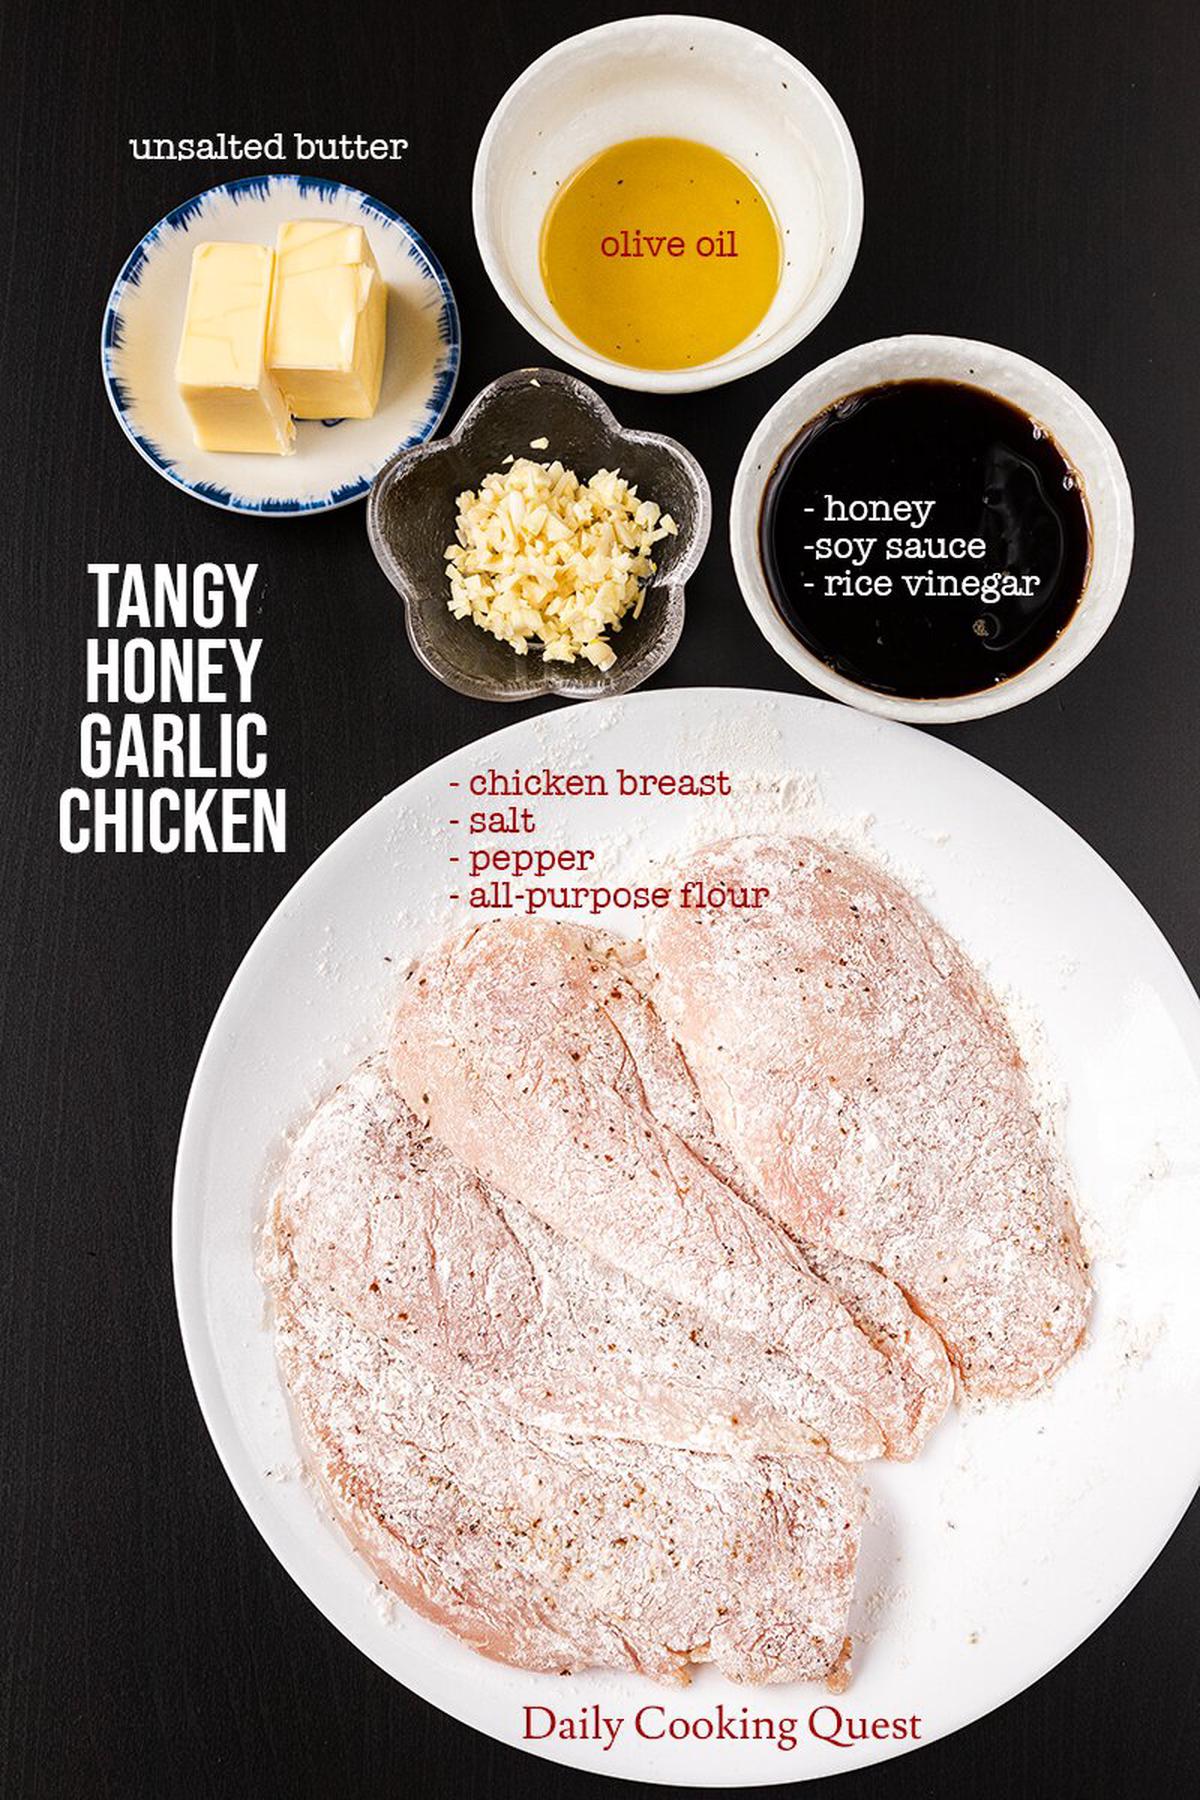 Ingredients for tangy honey garlic chicken: chicken breasts, salt, pepper, all-purpose flour, olive oil, unsalted butter, garlic, honey, soy sauce, and rice vinegar.